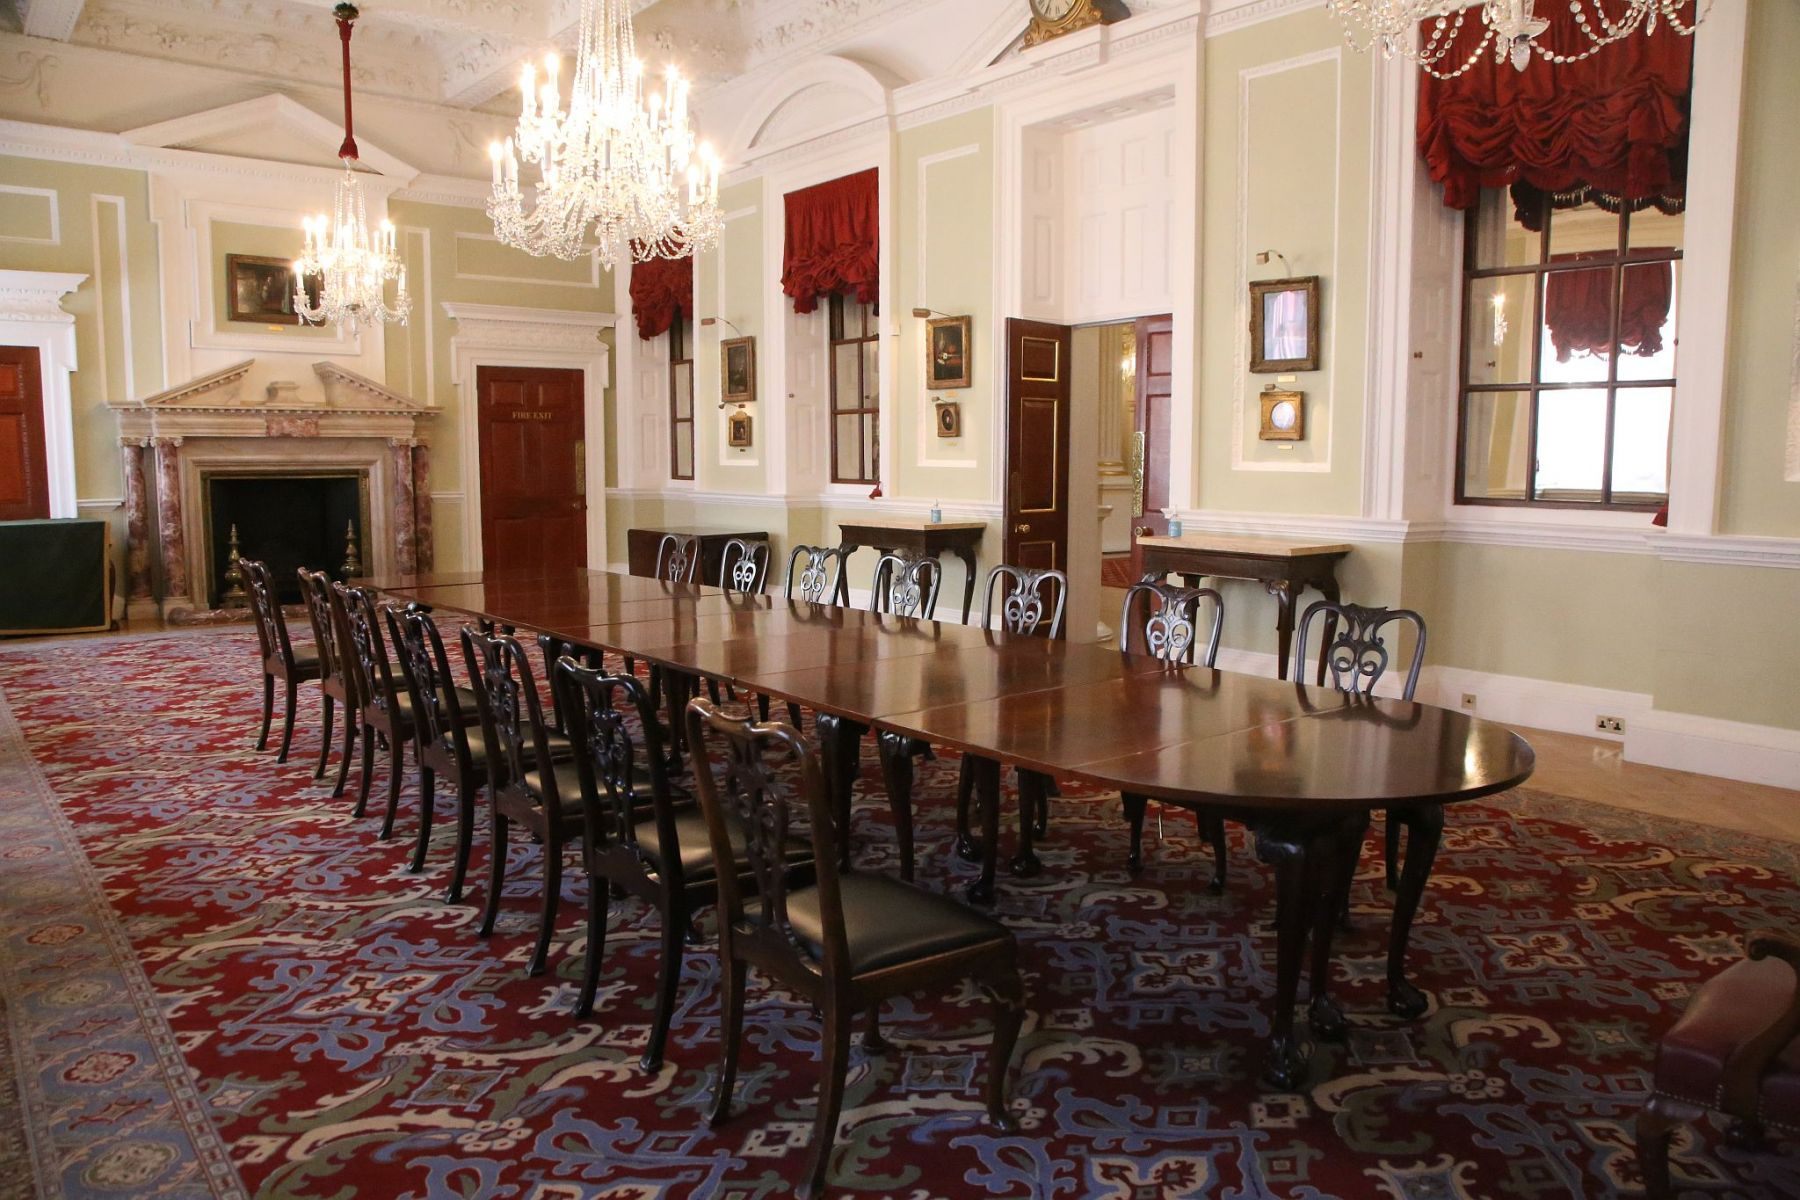 Meeting room at The Mansion House, home to the Lord Mayor of the City of London.